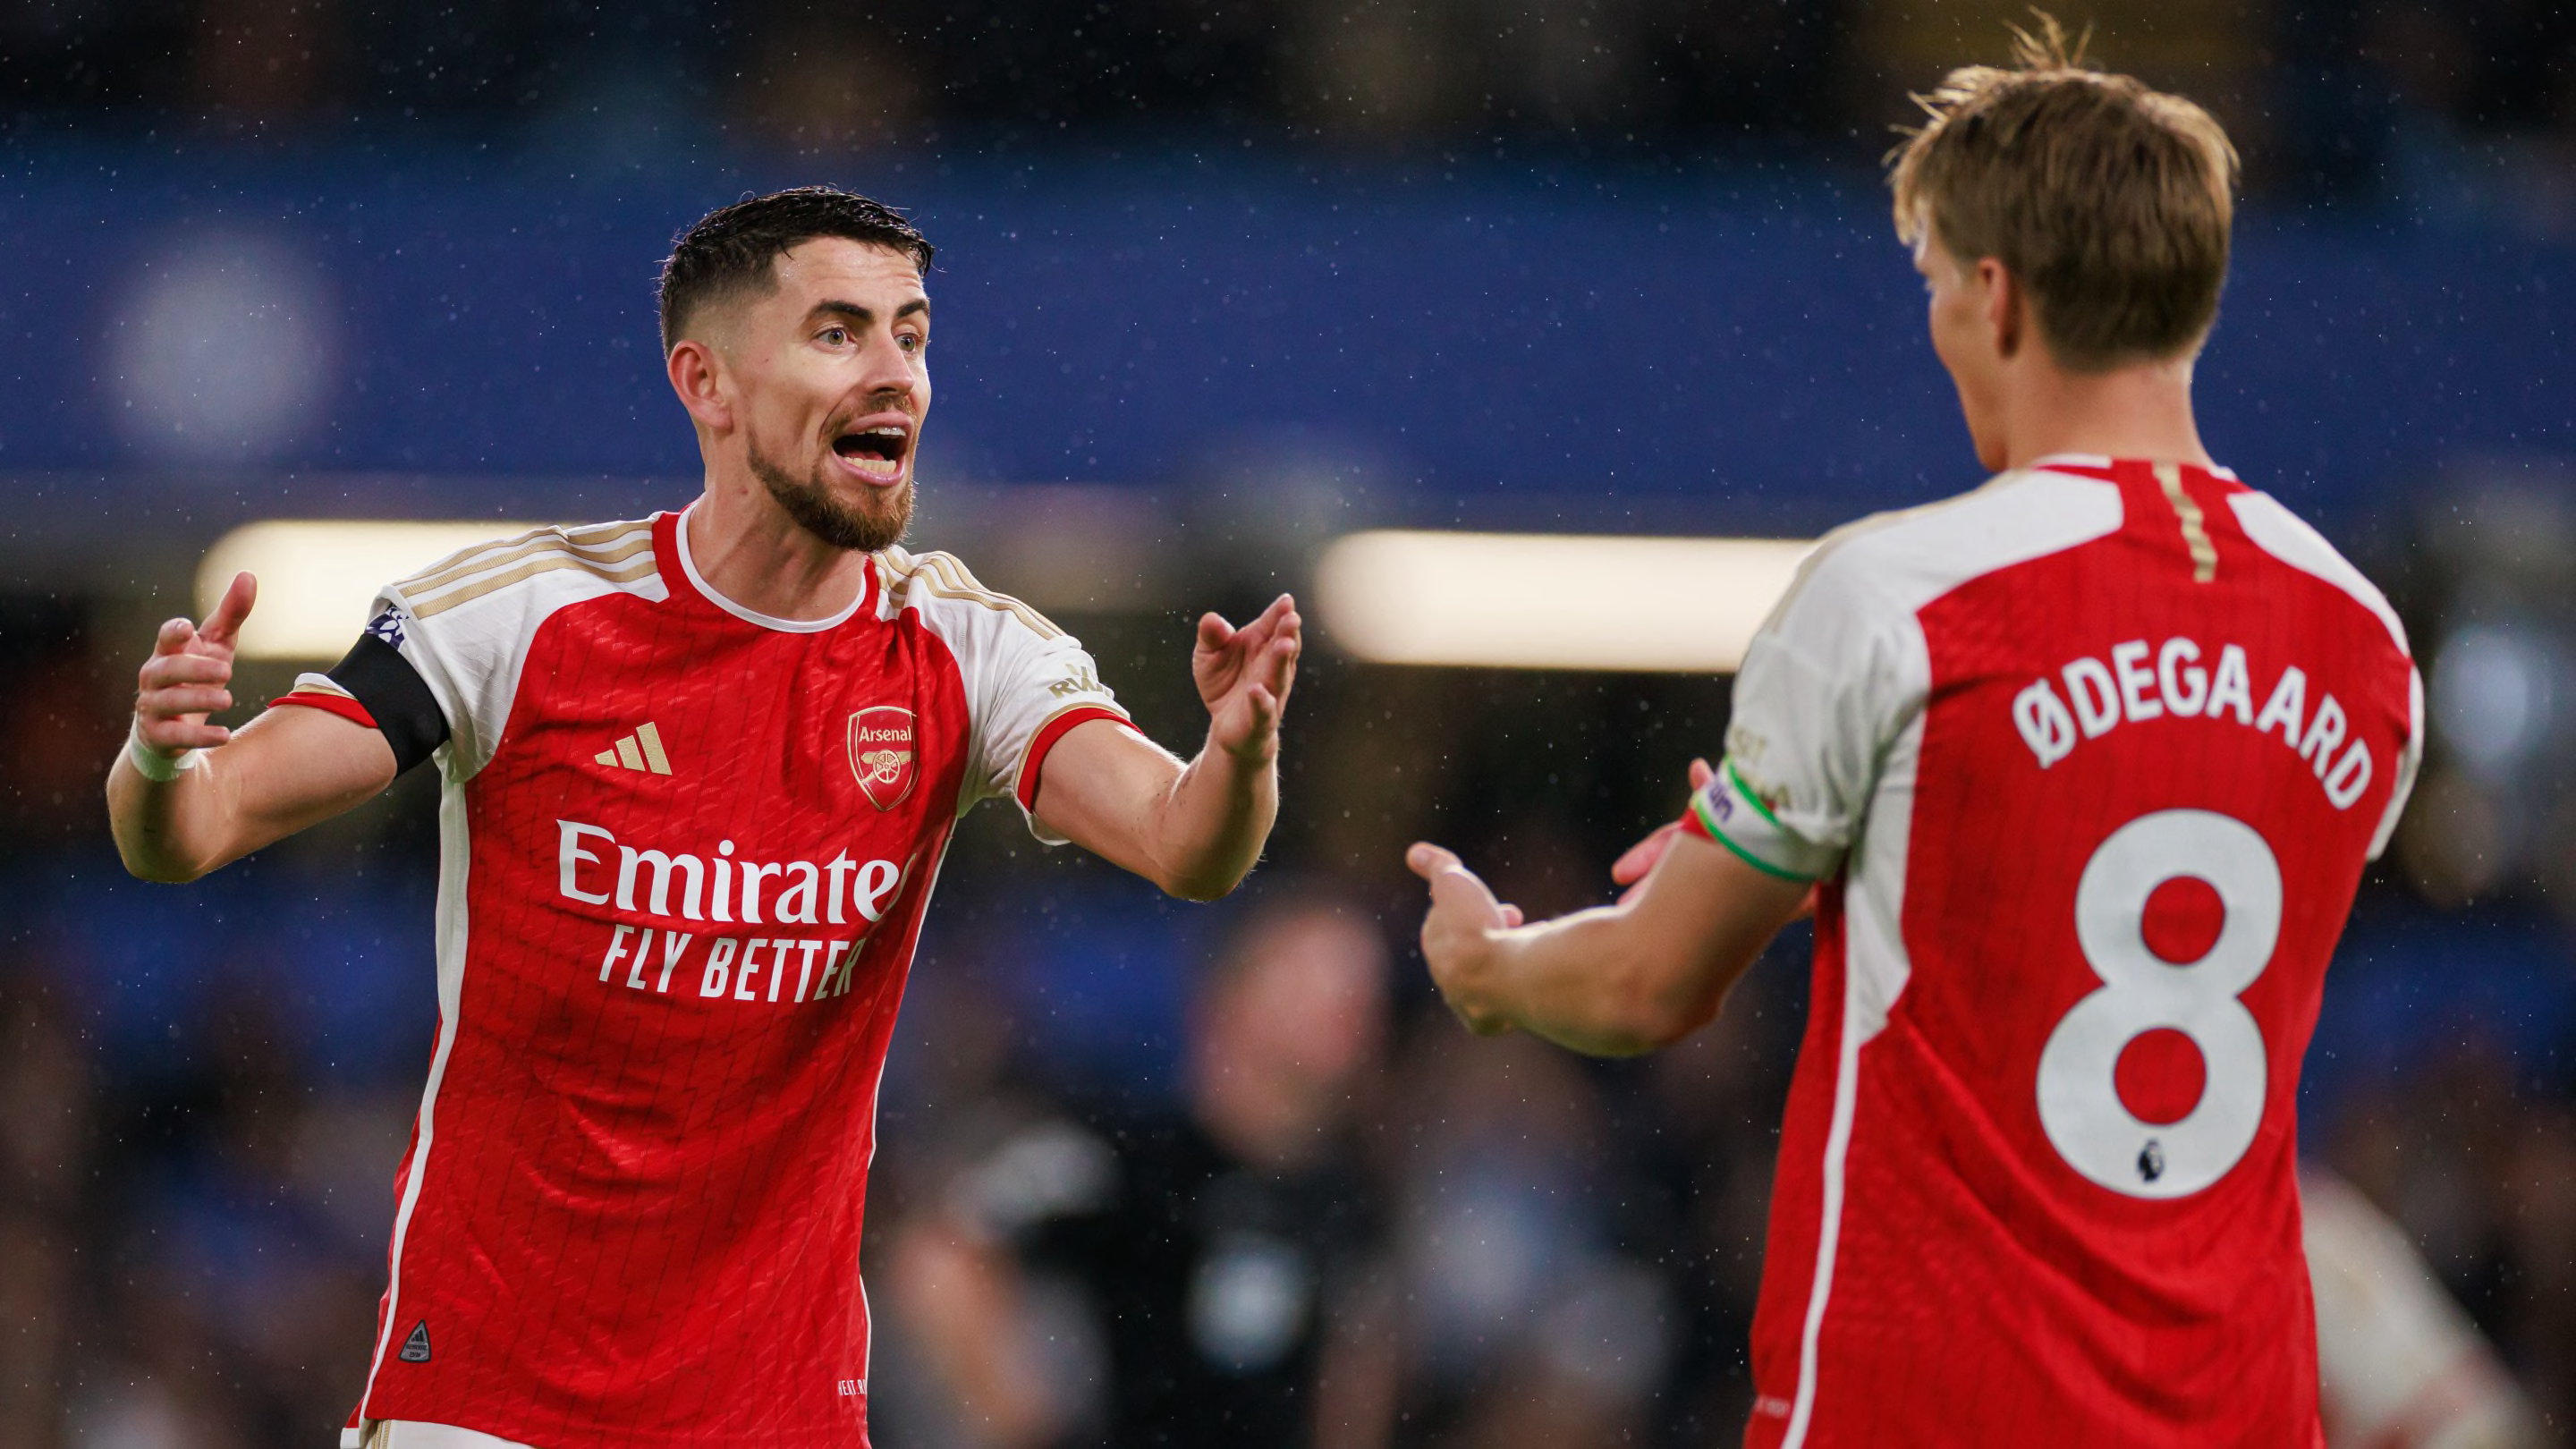 Arsenal midfielder 'expected' to sign new contract after positive talks